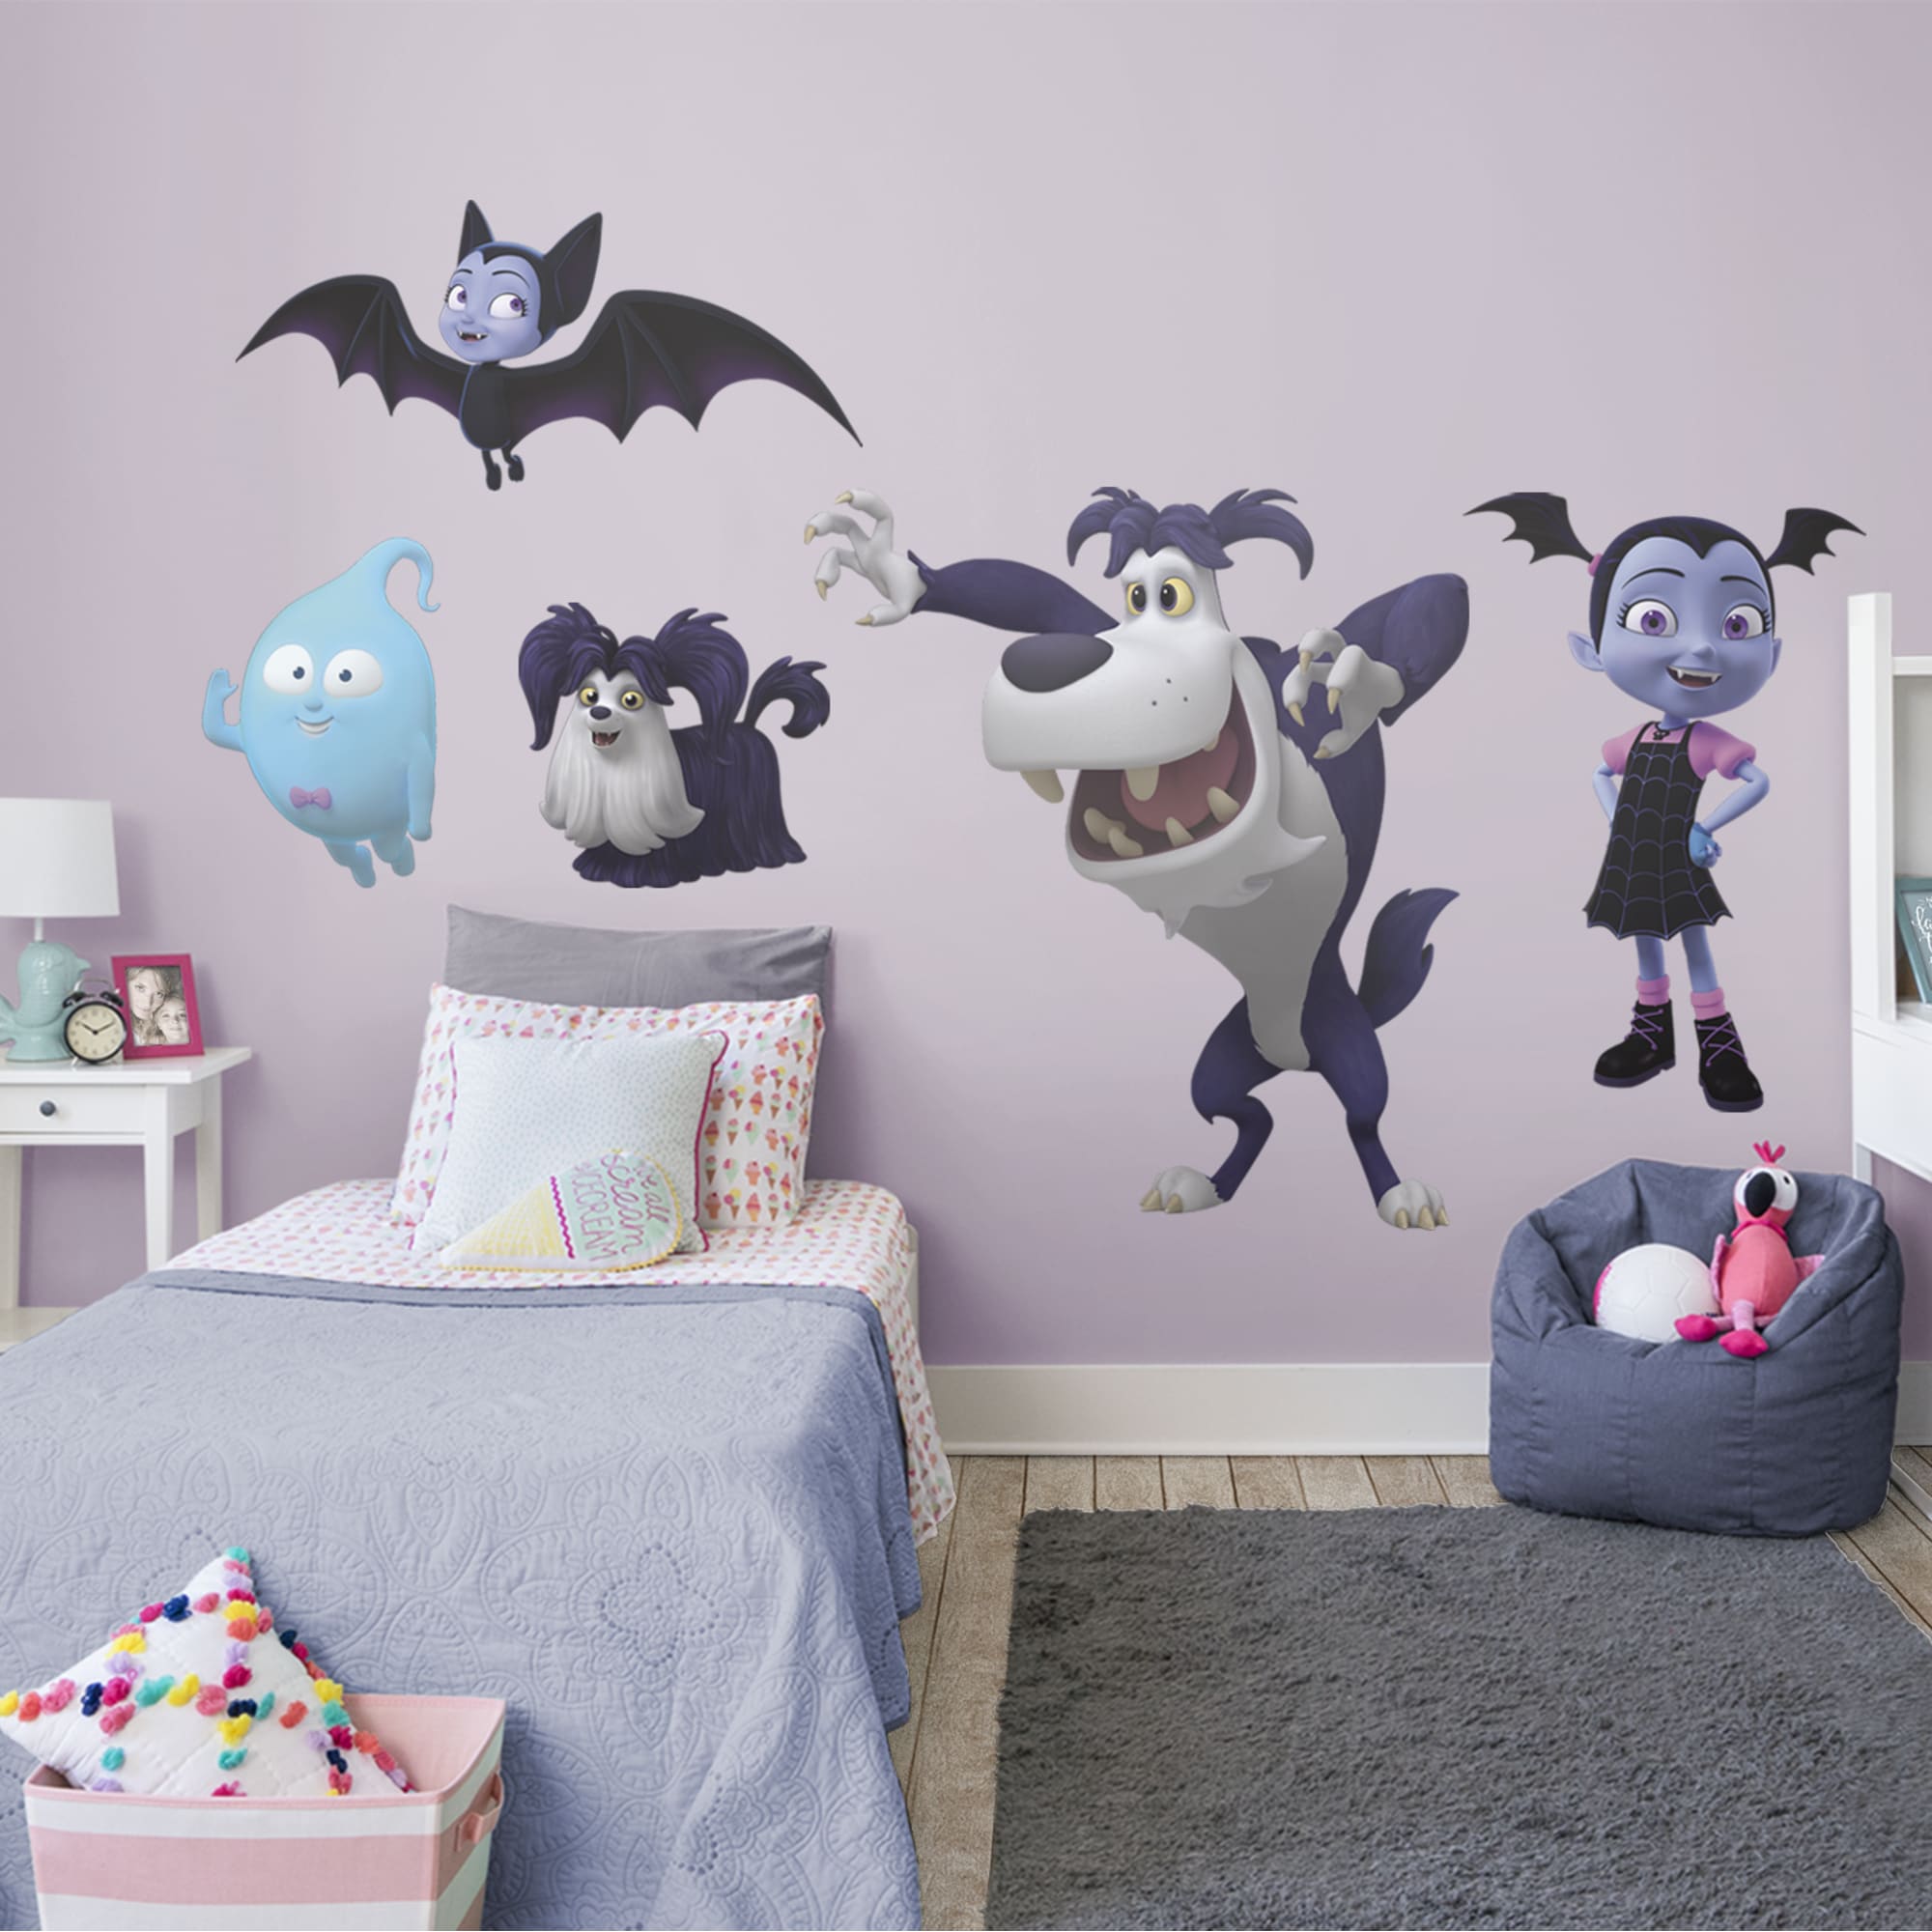 Up: Kevin RealBig - Disney Removable Wall Adhesive Wall Decal Giant Character +2 Wall Decals 38W x 48H